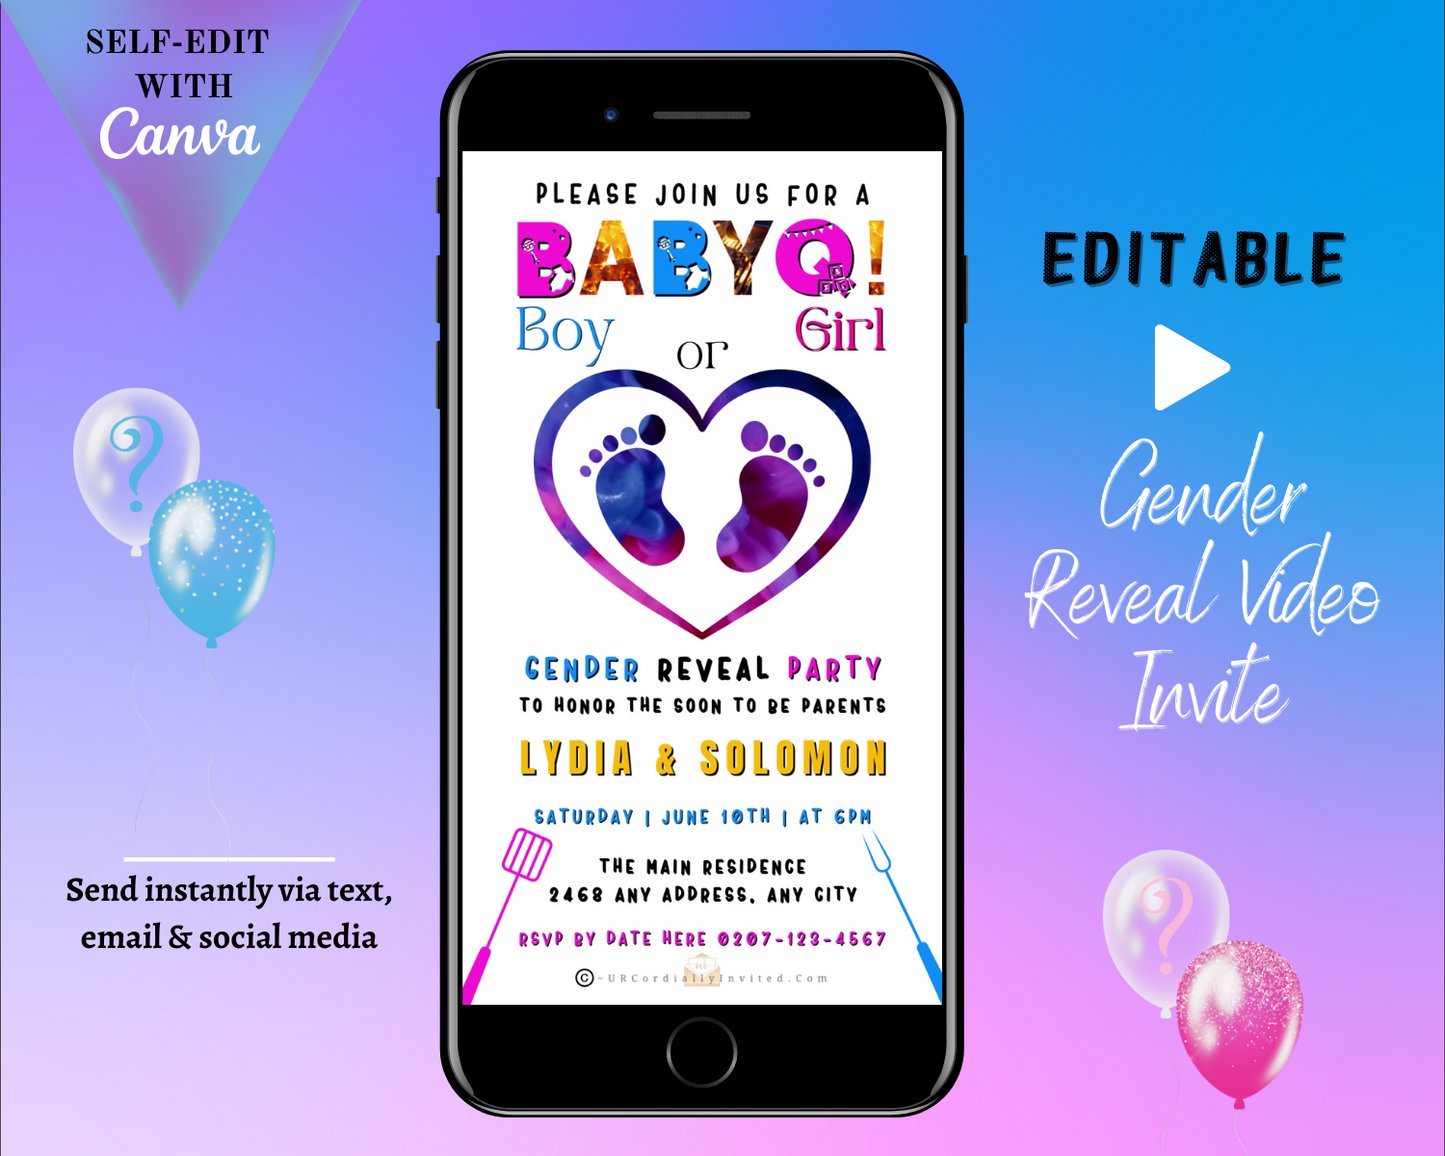 Smartphone displaying customizable BABYQ Feet In Heart Digital Gender Reveal Video Invite, showing heart with footprints on invitation screen, ideal for personalizing and sending electronically via text or email.